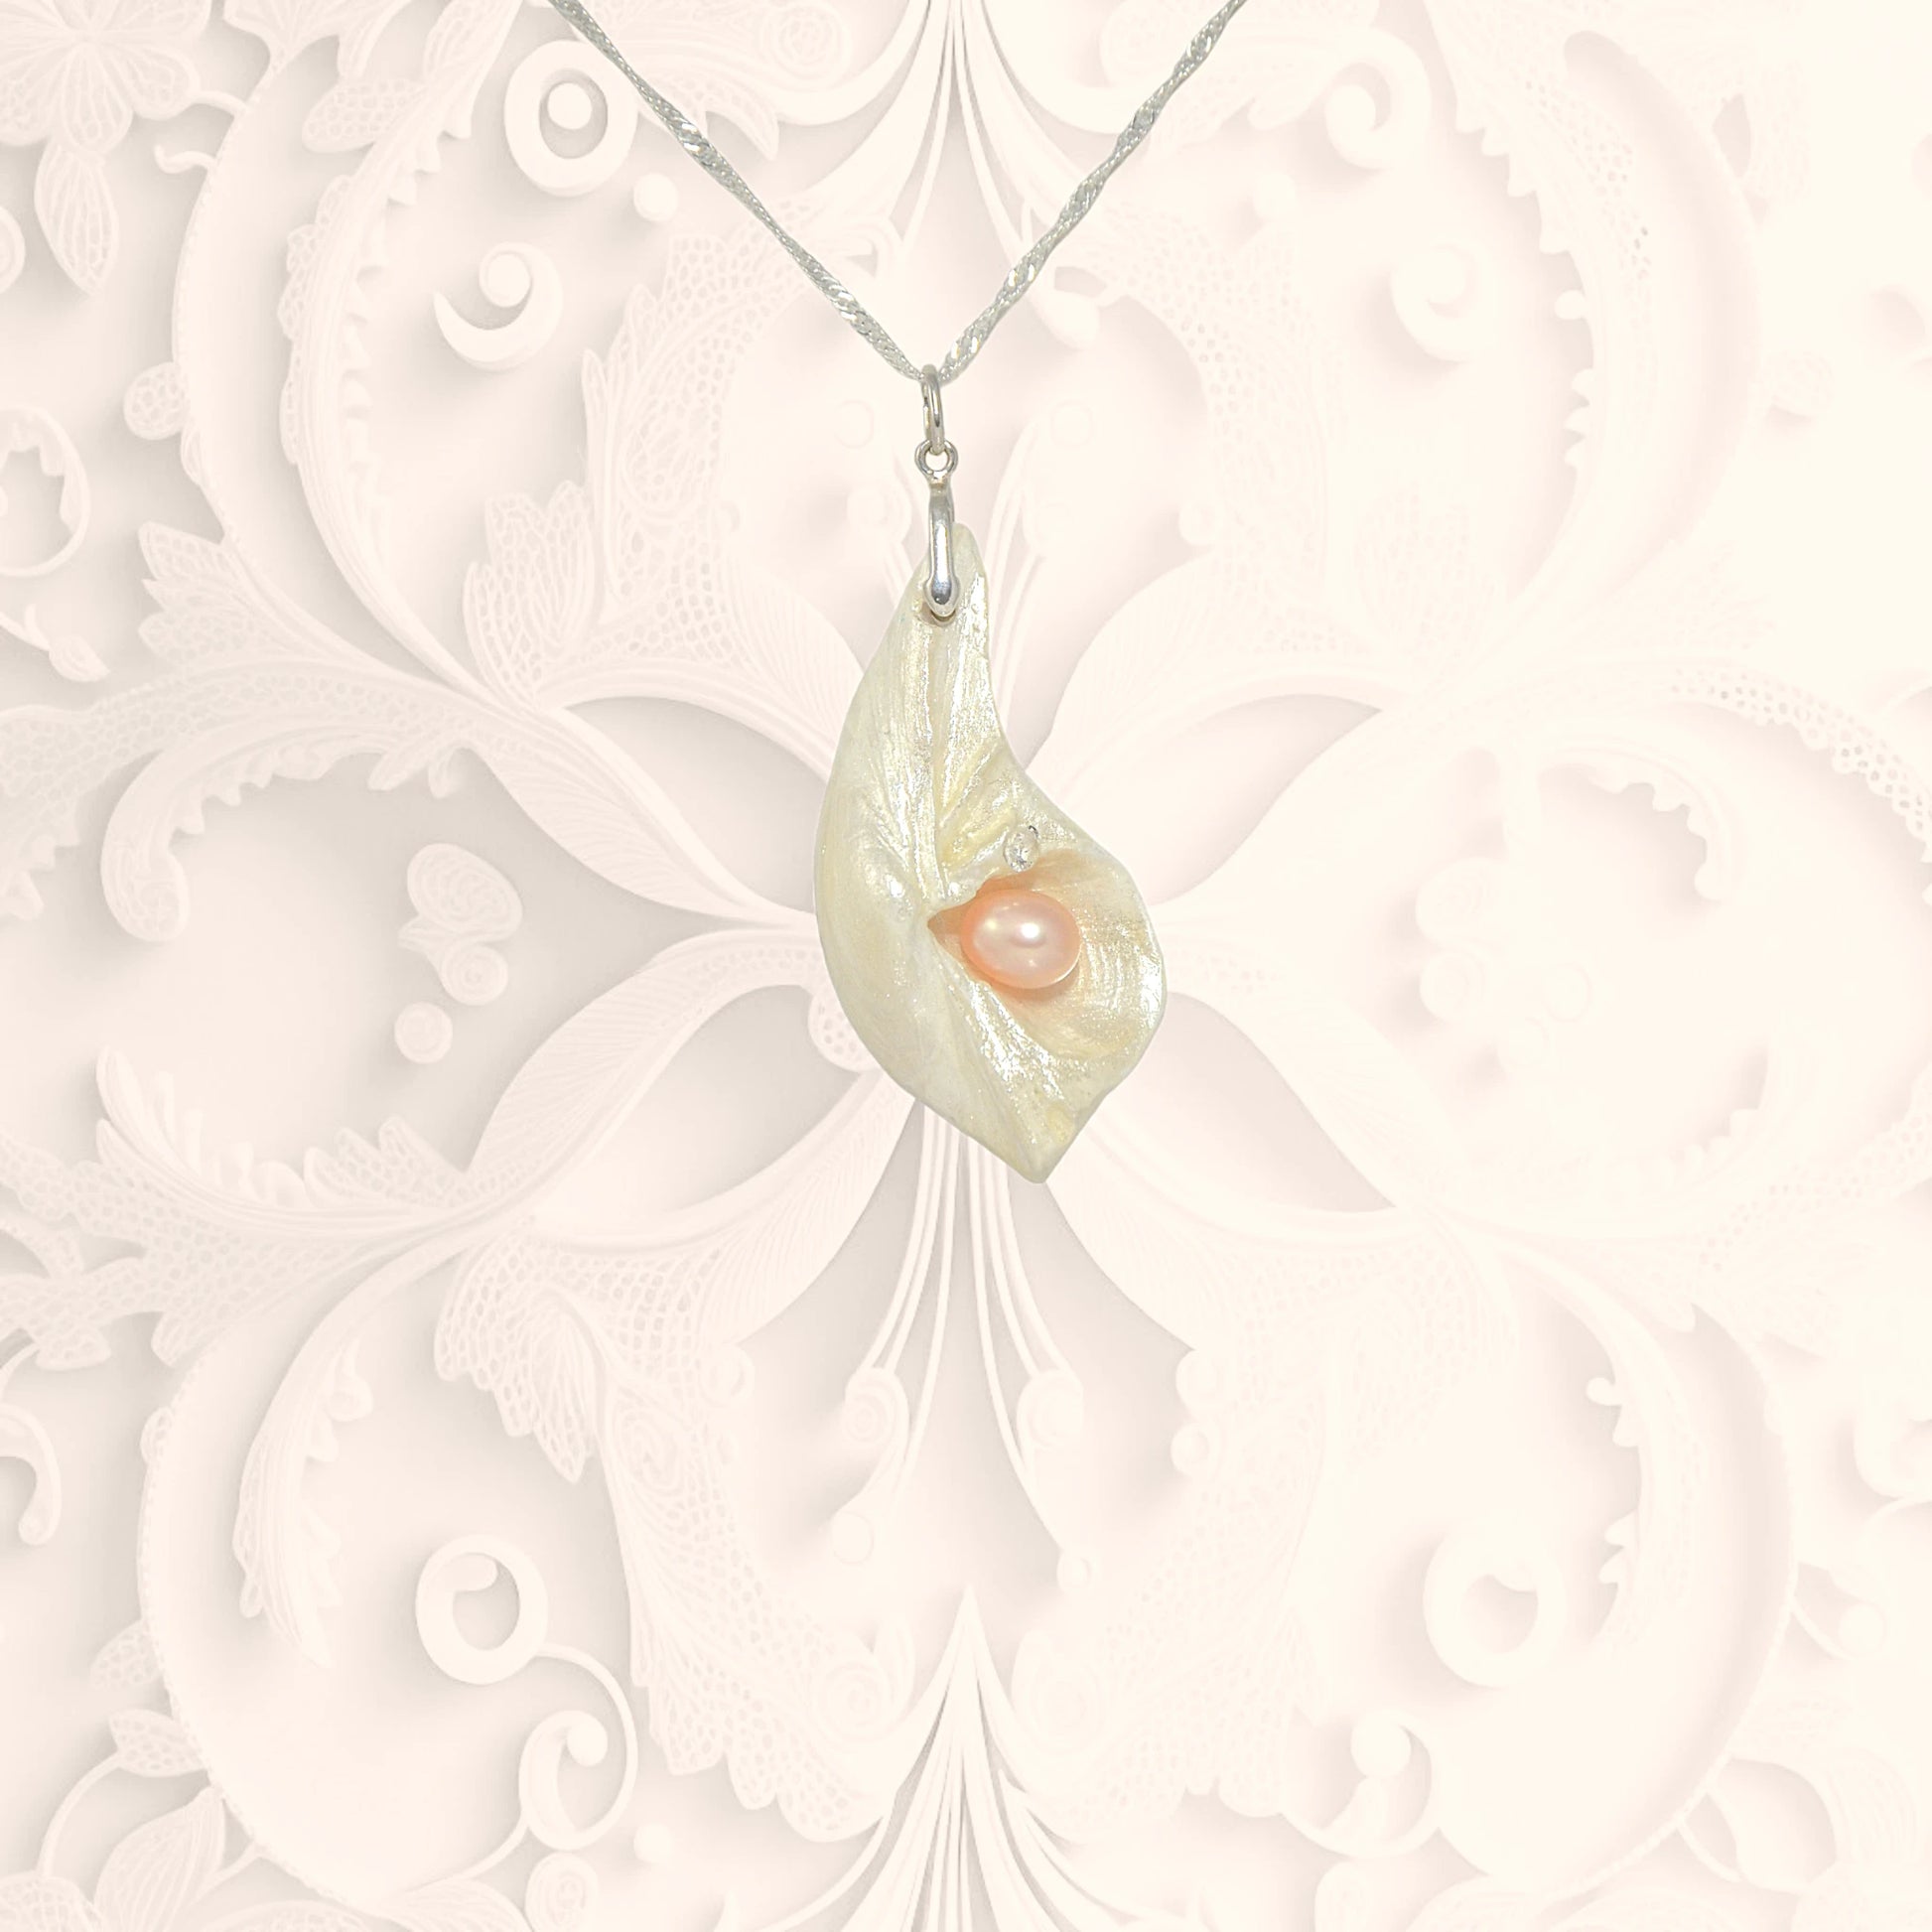 Athena is the name of the pendant in front of a white ornate background..  It is a natural seashell from the beaches of Vancouver Island. The pendant has a real pink freshwater pearl and a faceted herkimer diamond. 